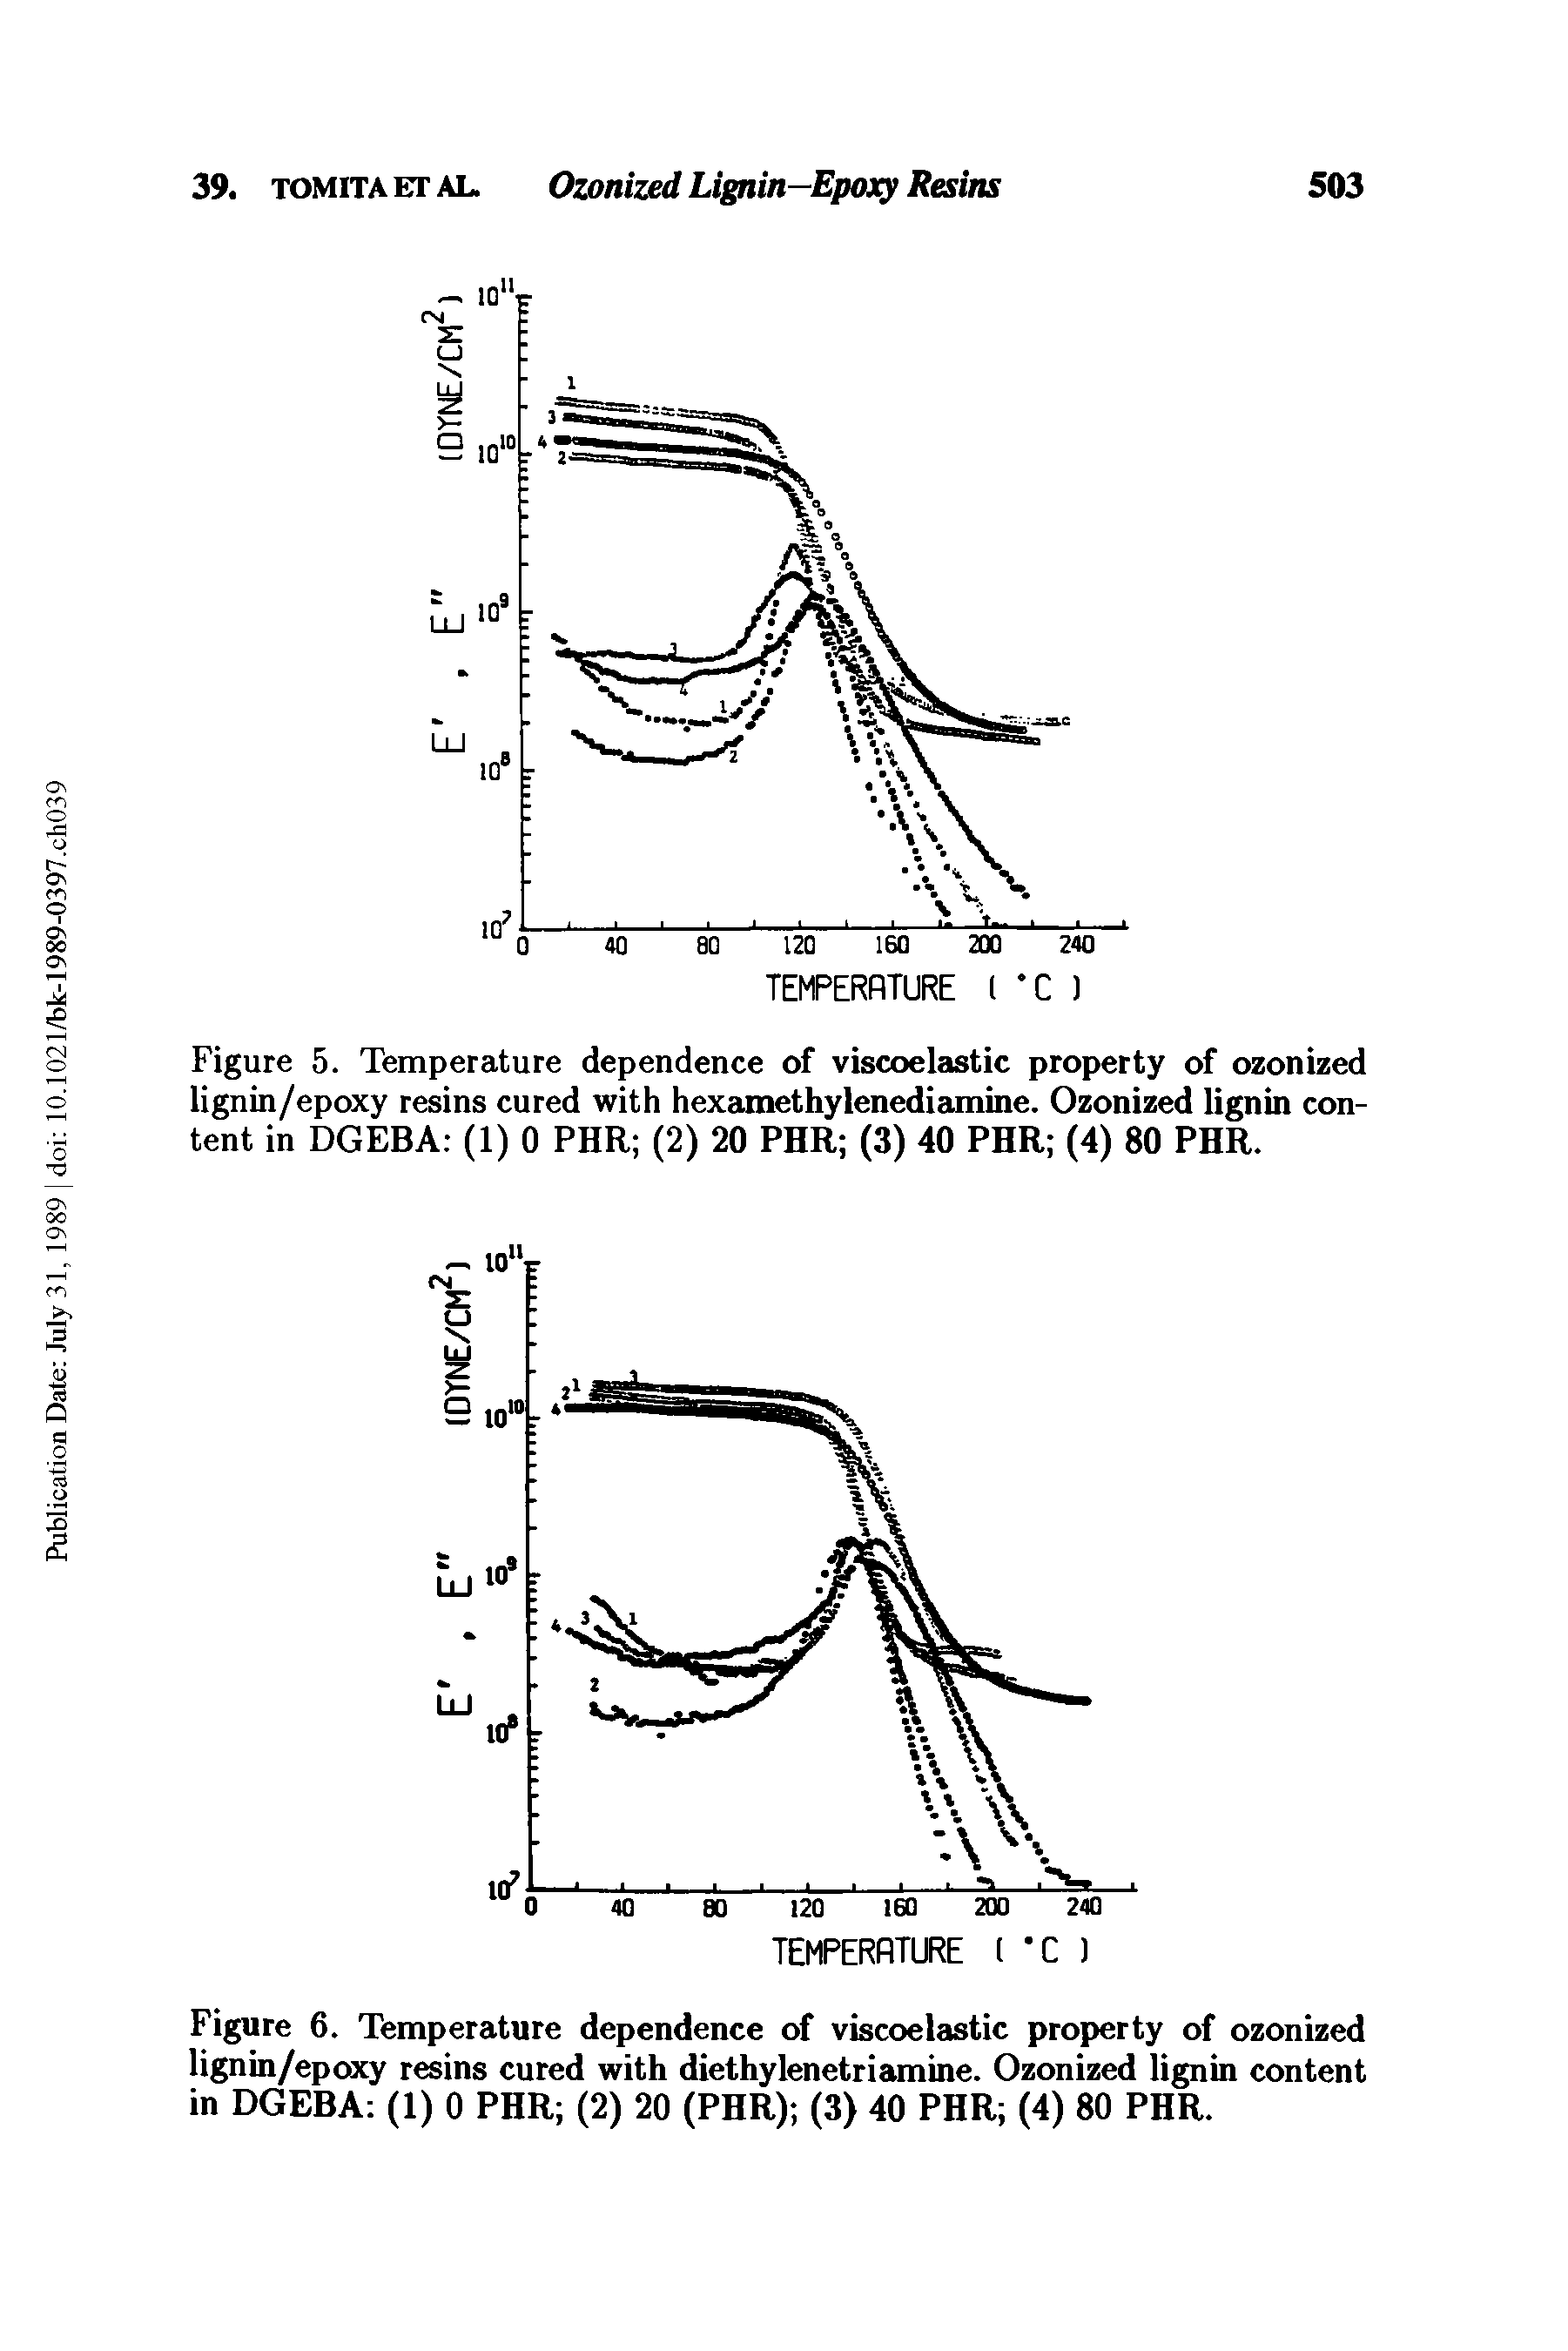 Figure 5. Temperature dependence of viscoelastic property of ozonized lignin/epoxy resins cured with hexamethylenediamine. Ozonized lignin content in DGEBA (1) 0 PHR (2) 20 PHR (3) 40 PHR (4) 80 PHR.